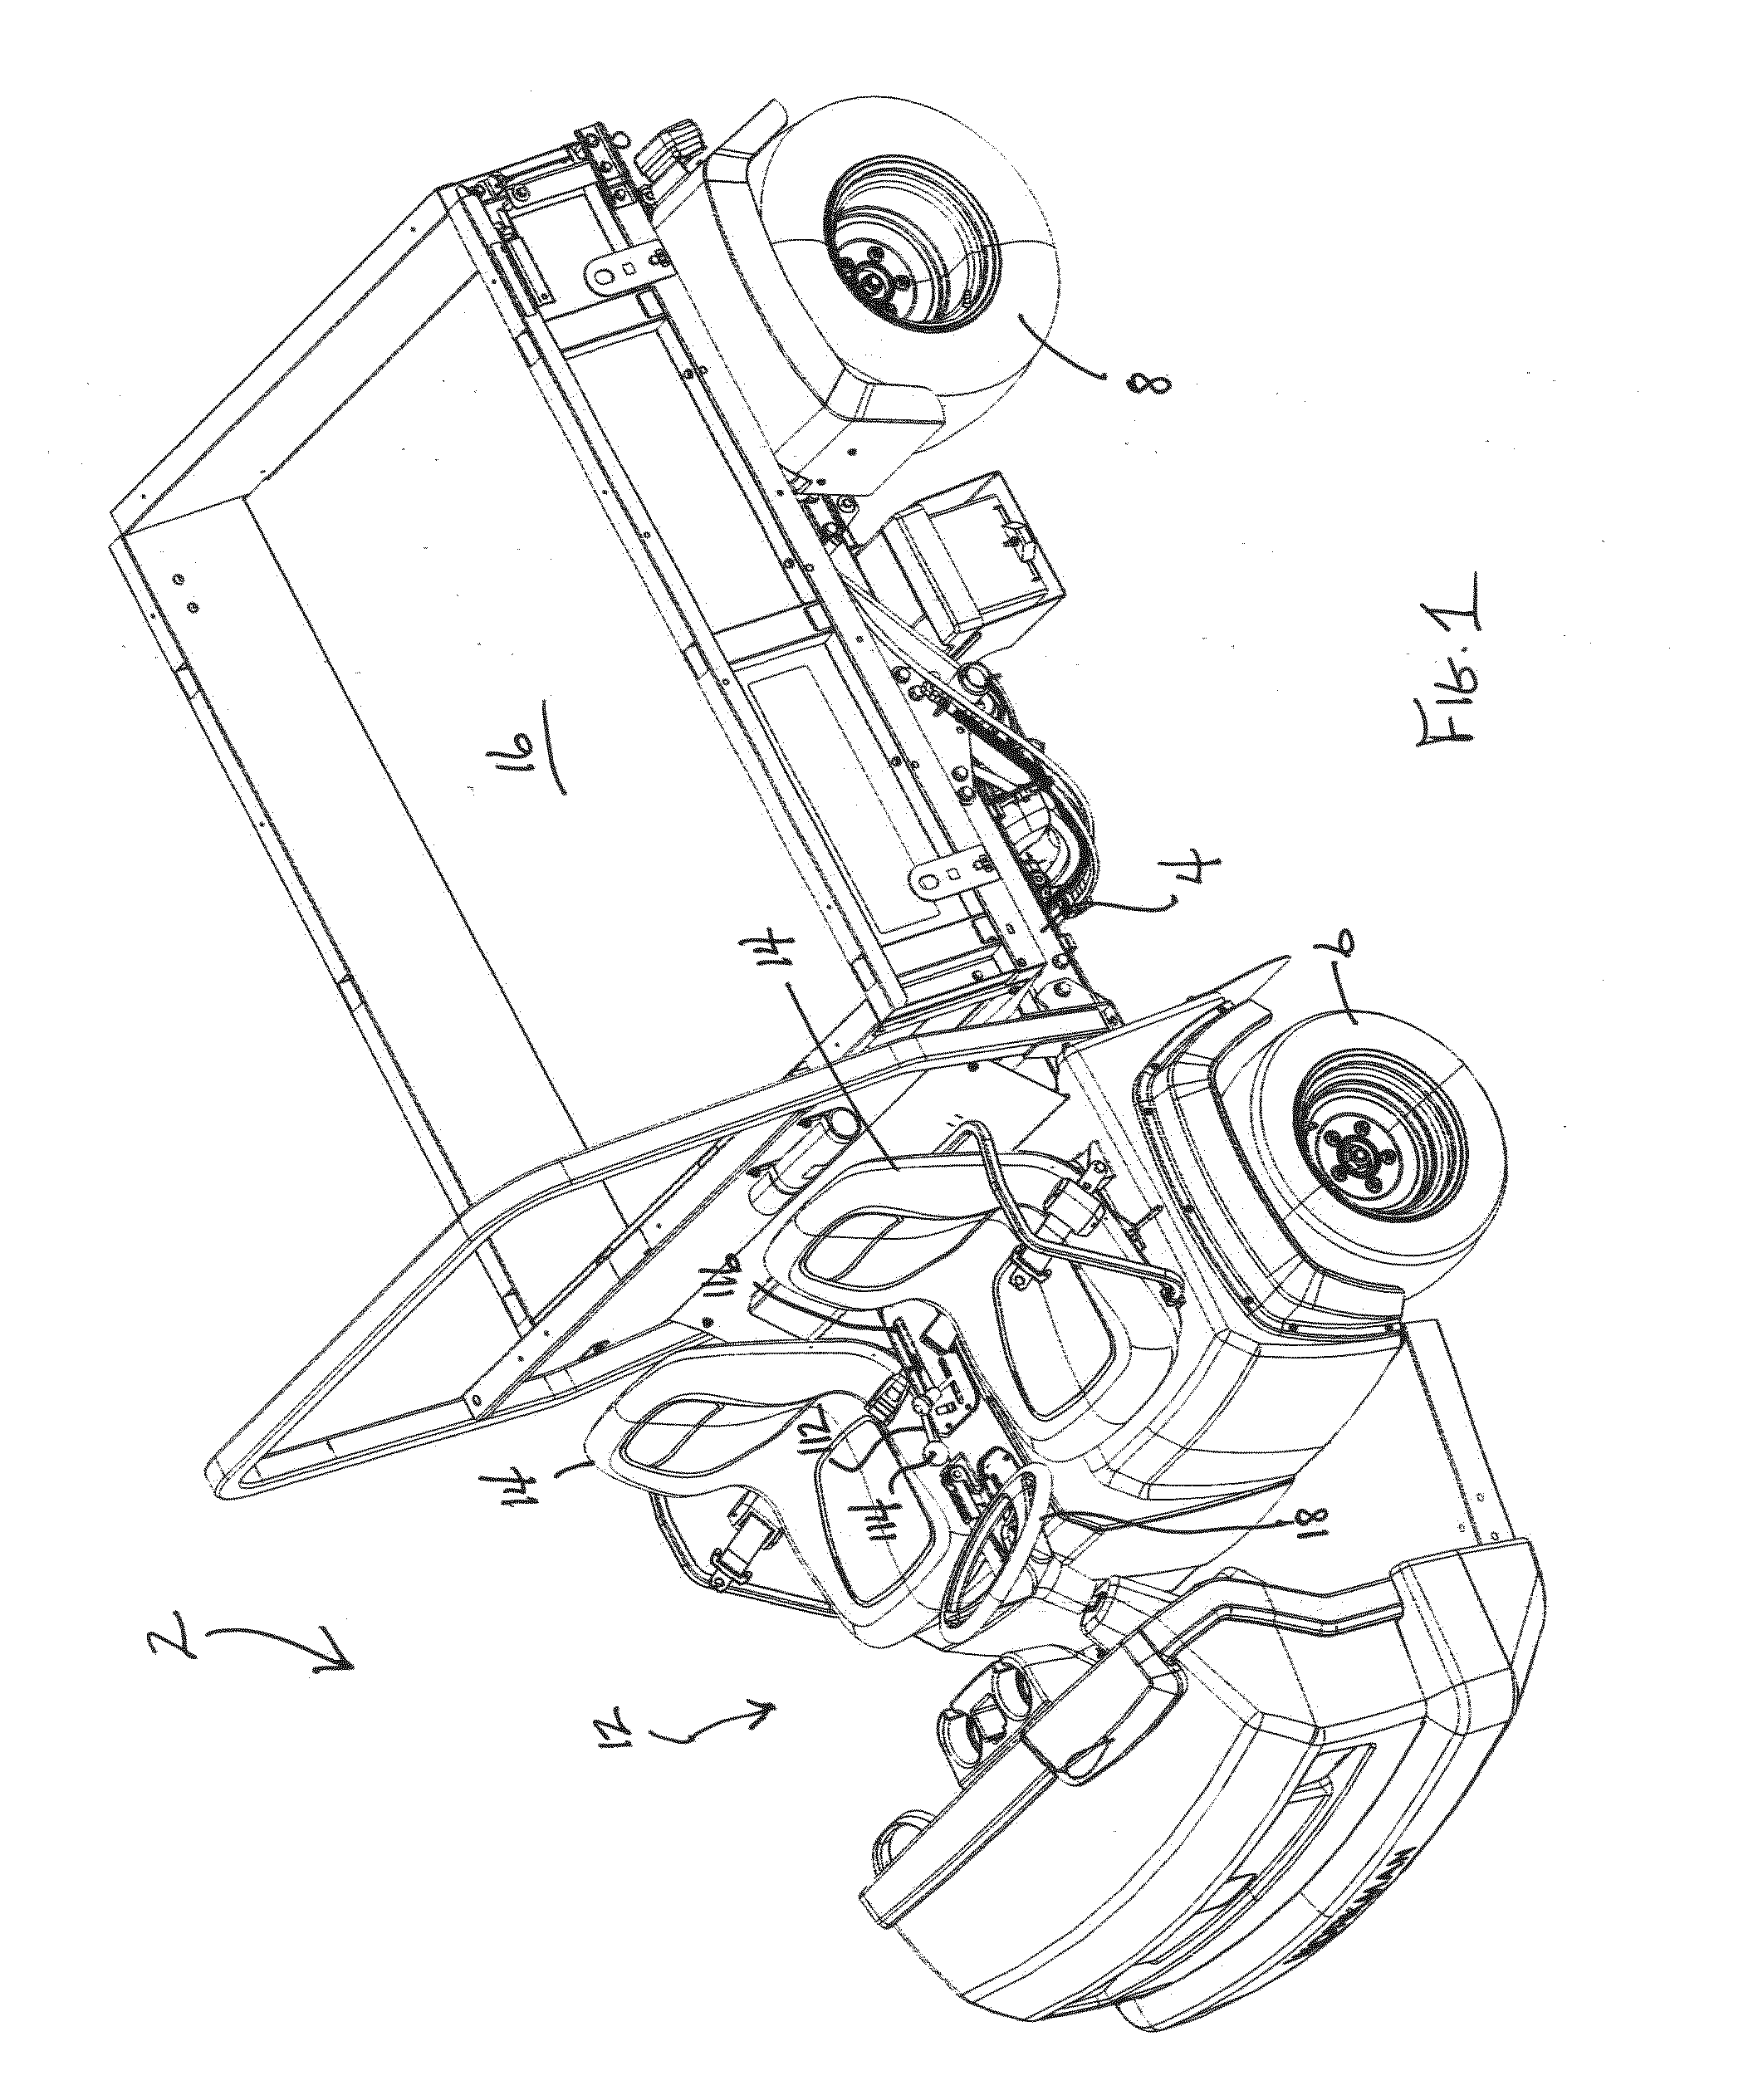 Utility vehicle with a continuously variable transmission having a system for selectively establishing a fixed maximum transmission ratio